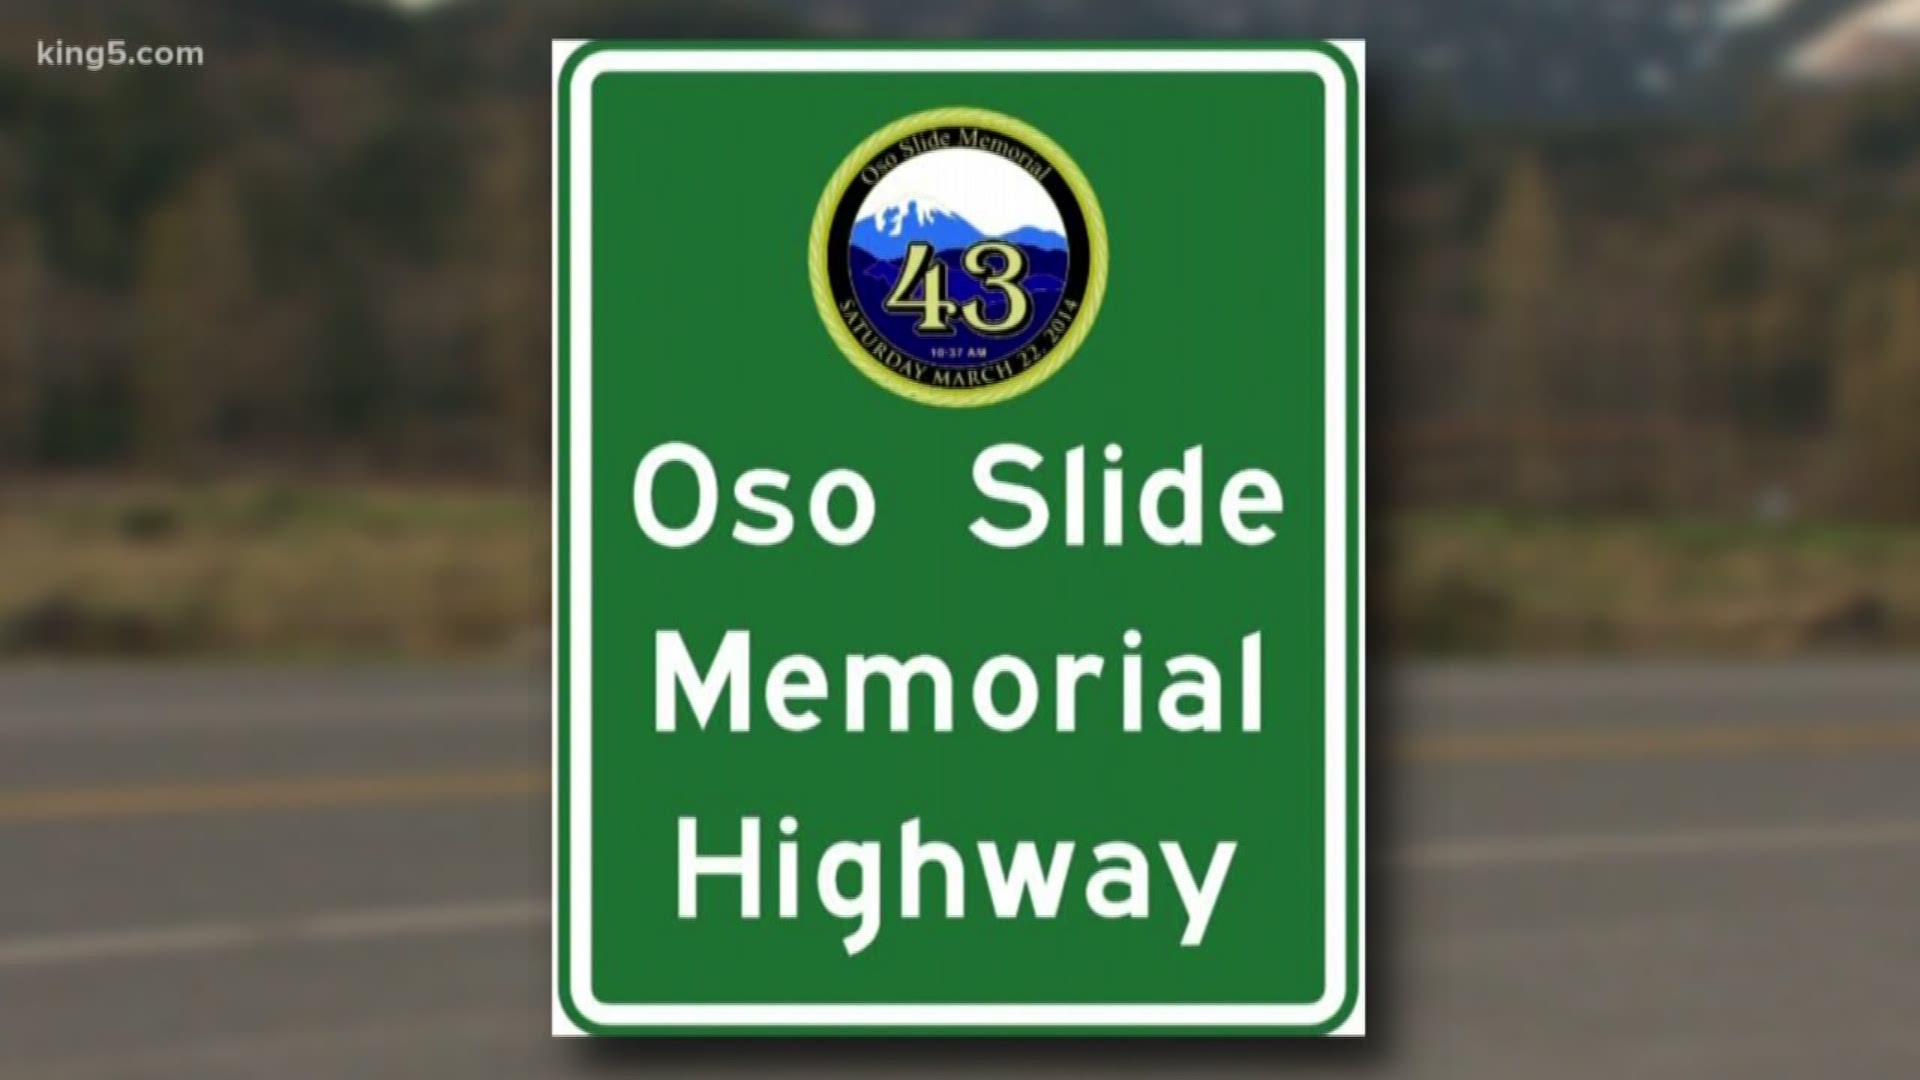 The state acted Wednesday on a request to remember the victims of the 2014 Oso landslide by renaming a portion of SR 530 the Oso Slide Memorial Highway.